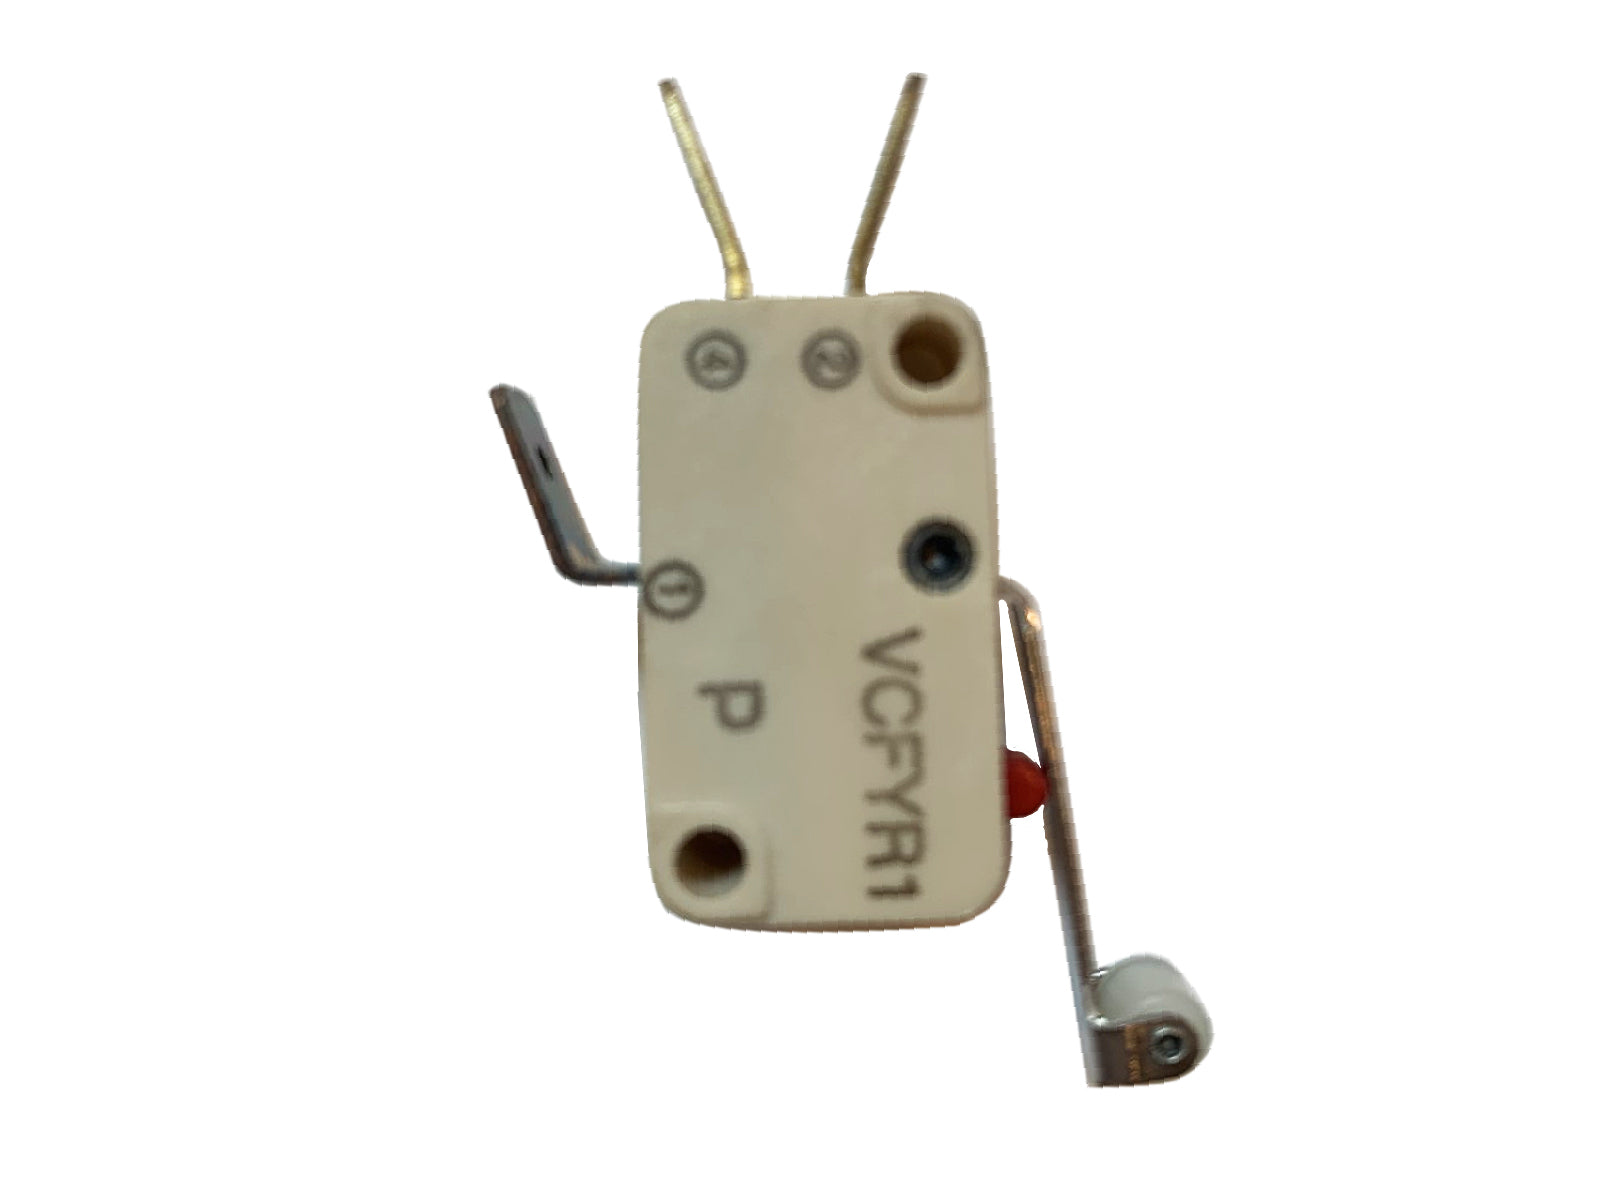 Burgess Micro Switch part number VCFYR1 - ppdistributors